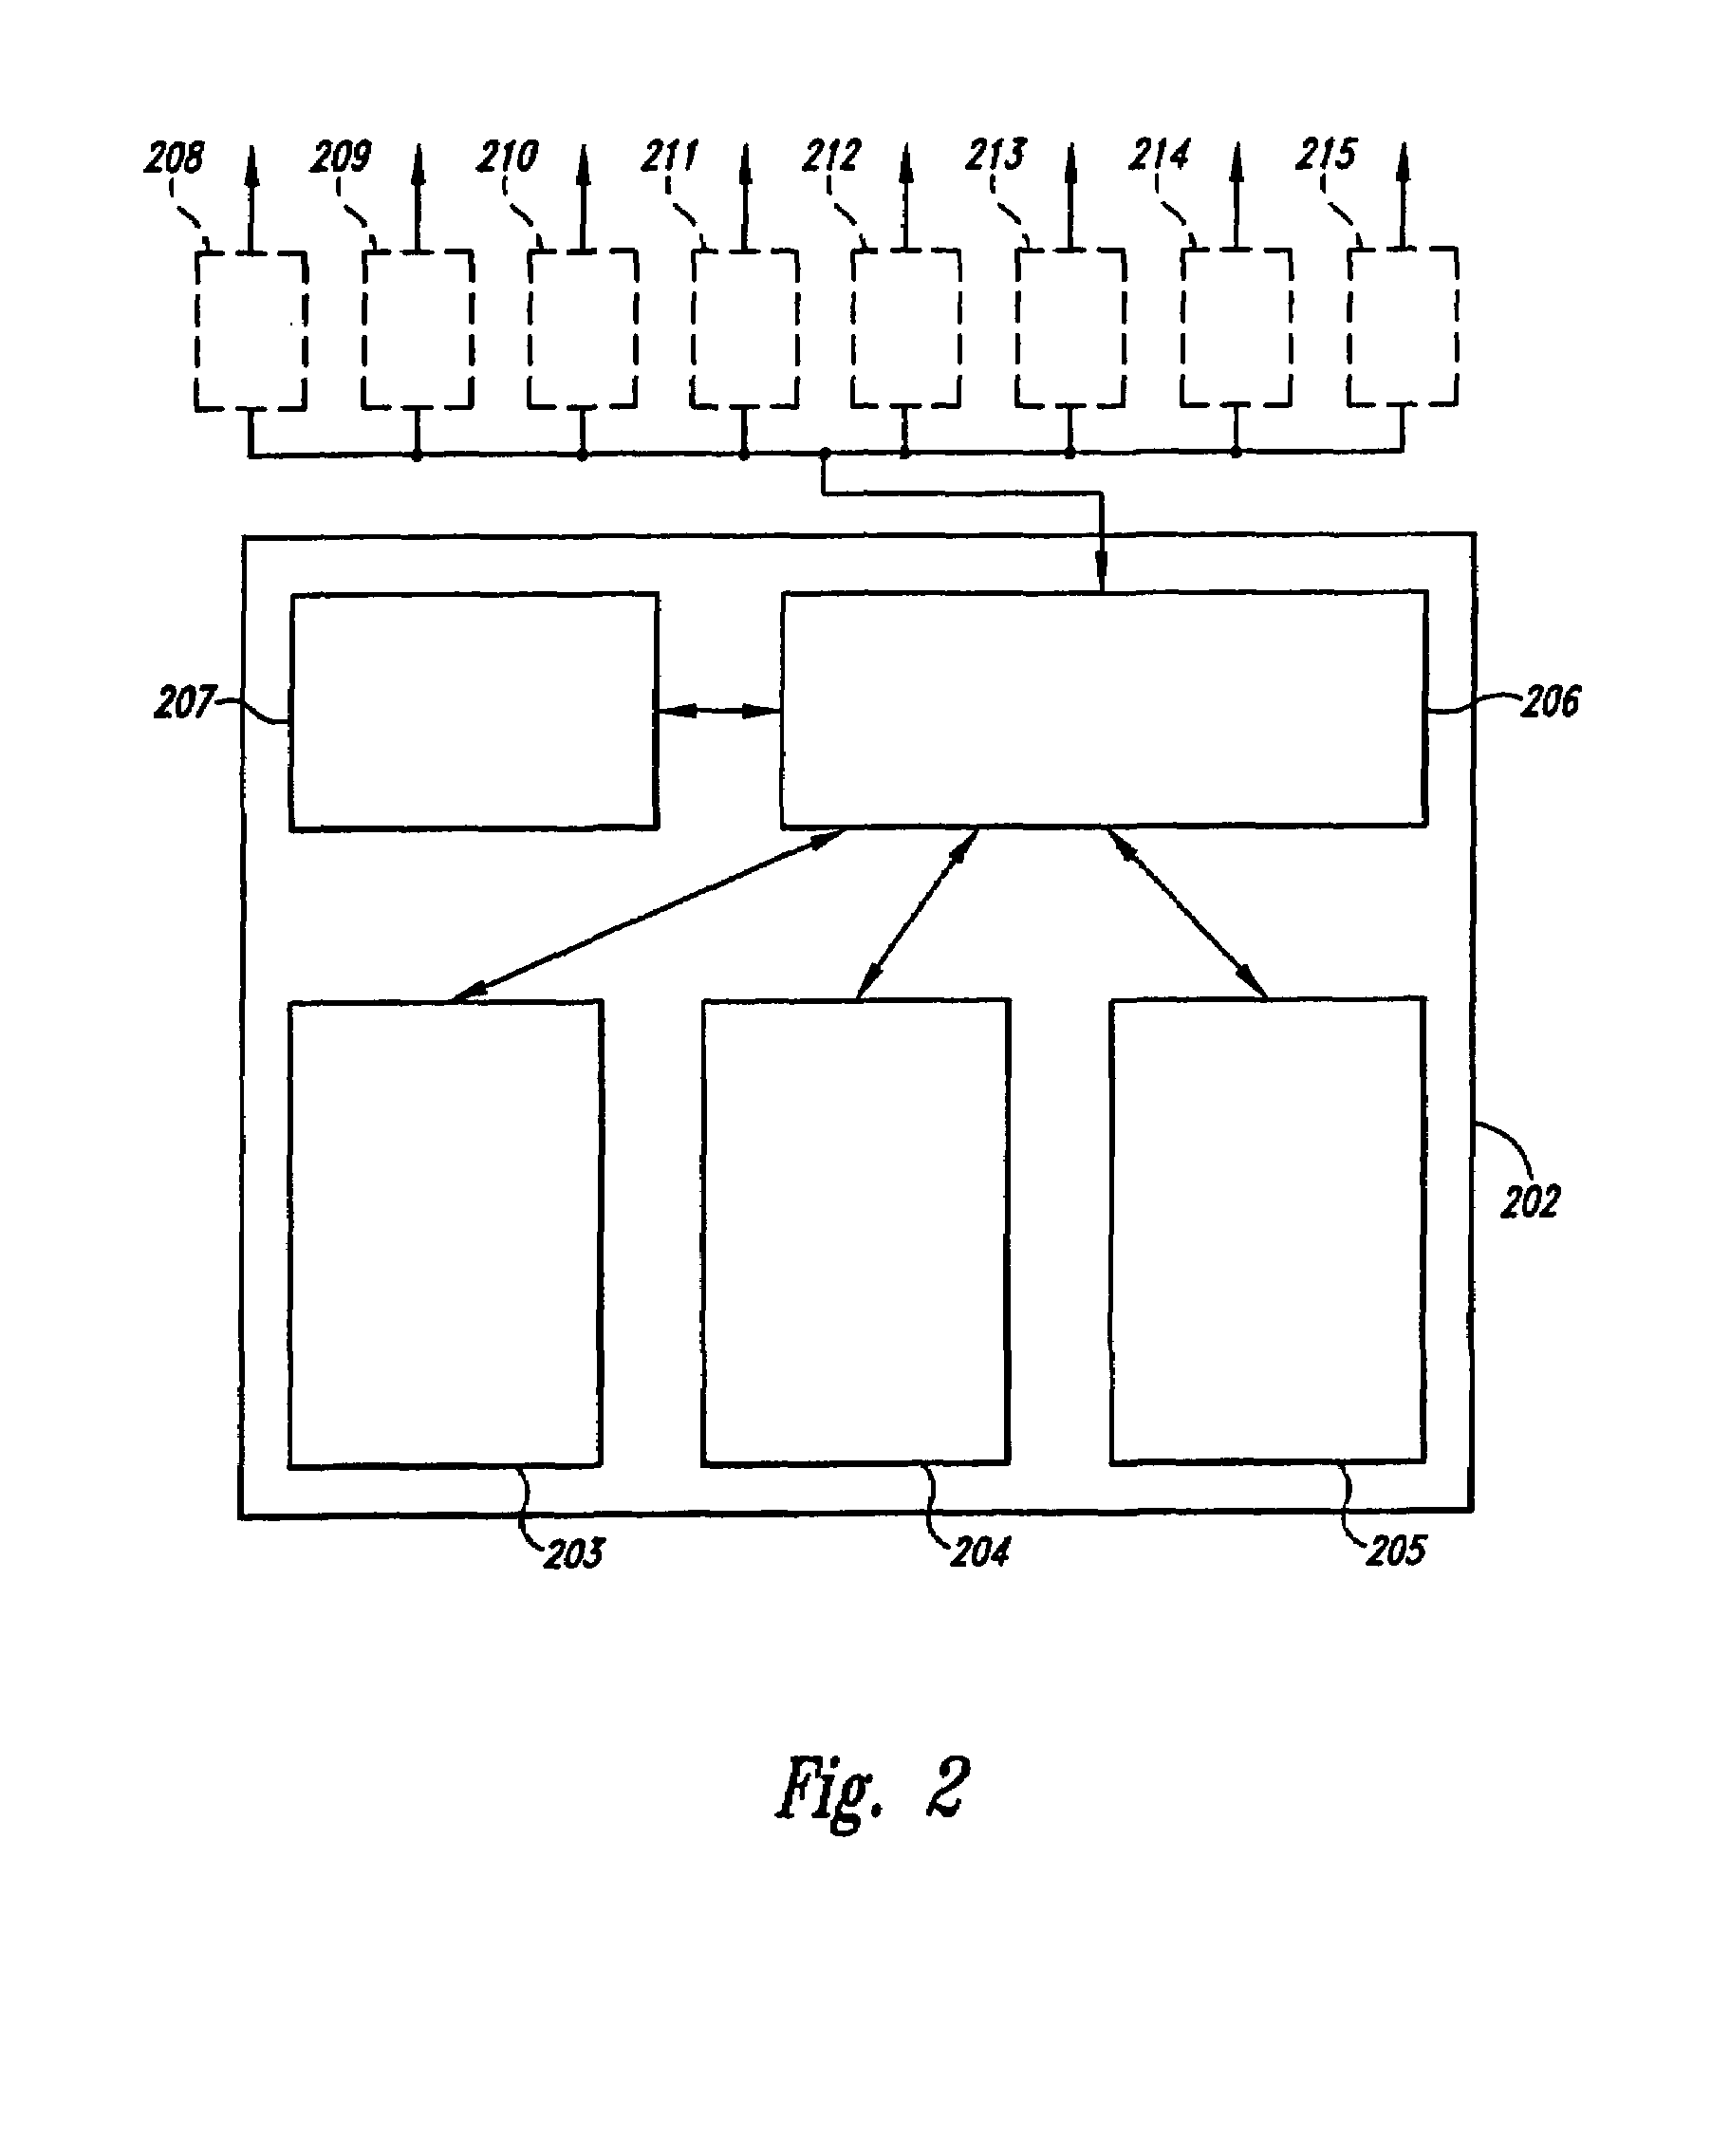 Method and system for throttling I/O request servicing on behalf of an I/O request generator to prevent monopolization of a storage device by the I/O request generator